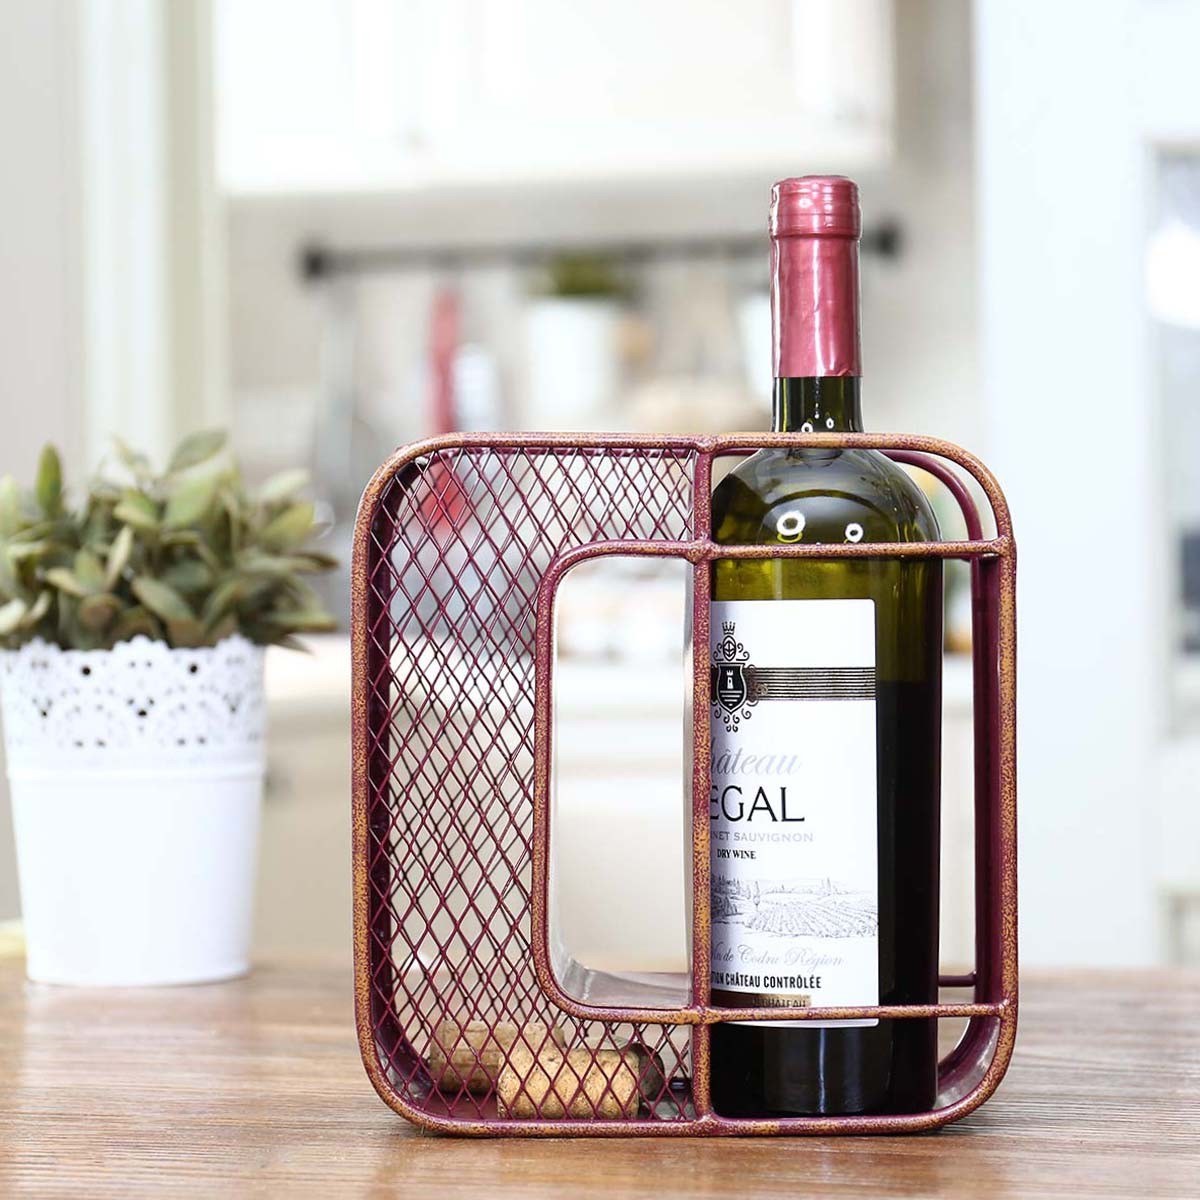 Letter "O" is a decorative items to your single wine bottle holder